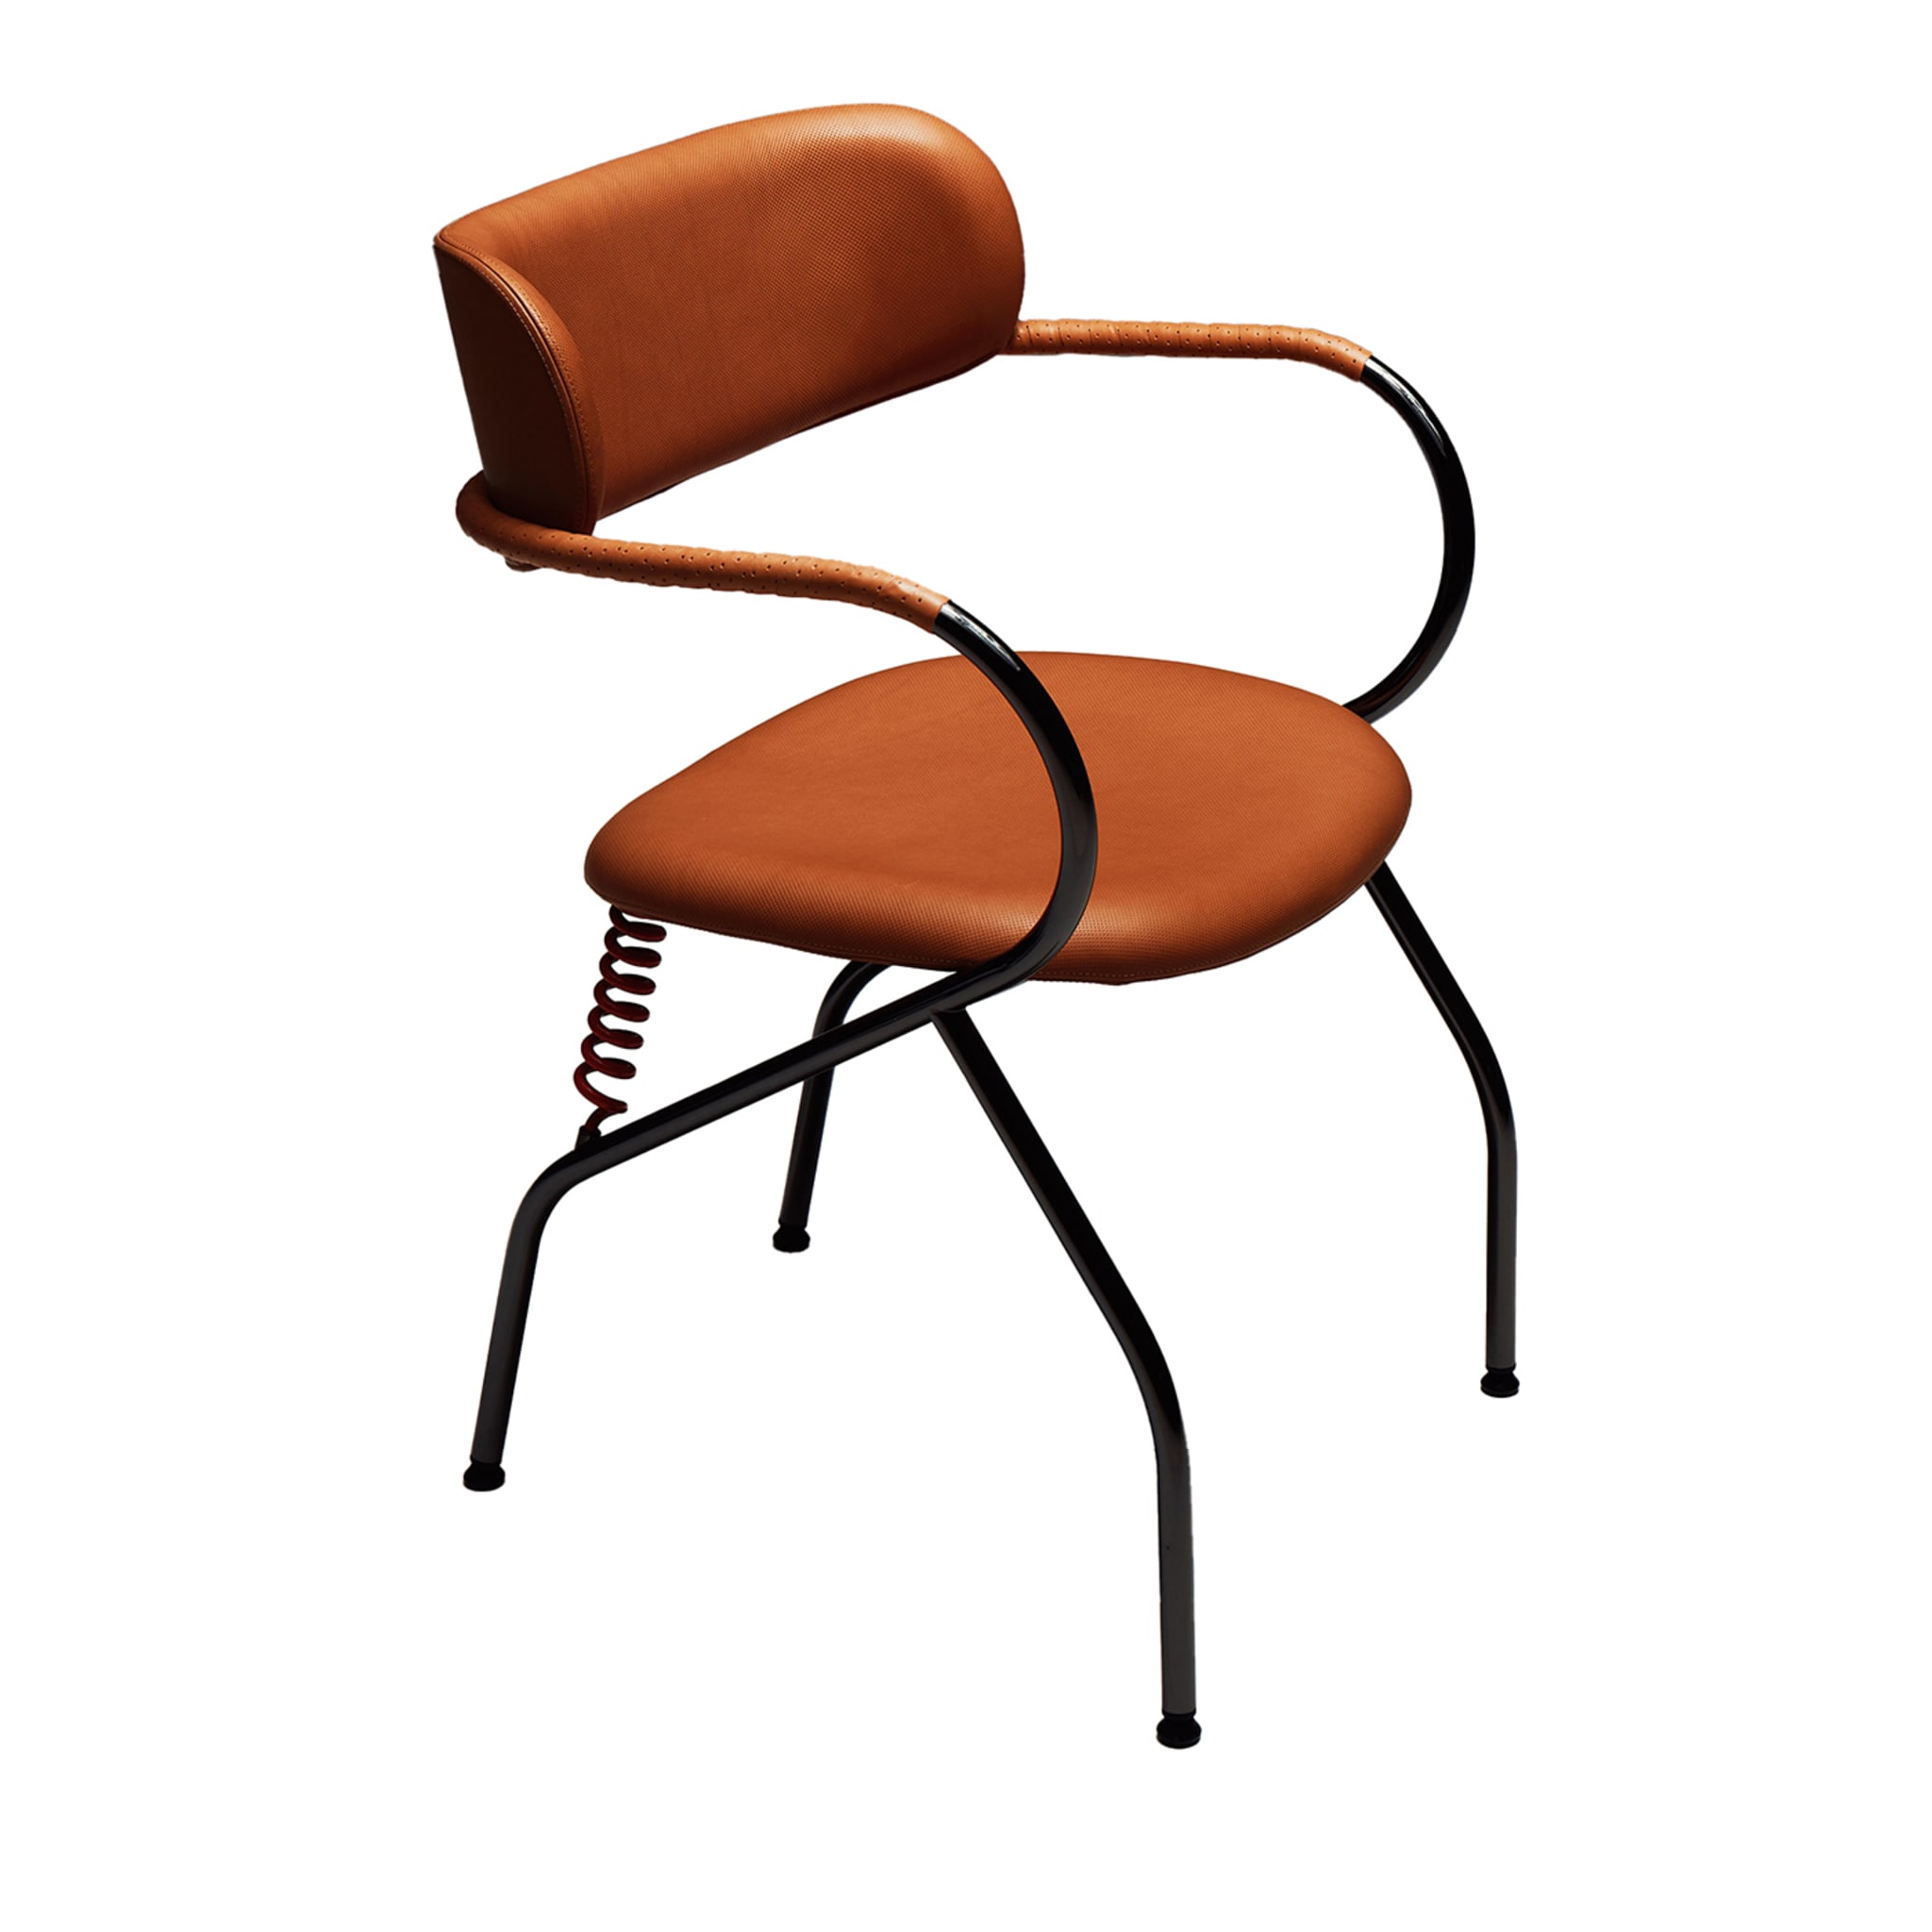 Spring Cognac Chair by Front - Main view